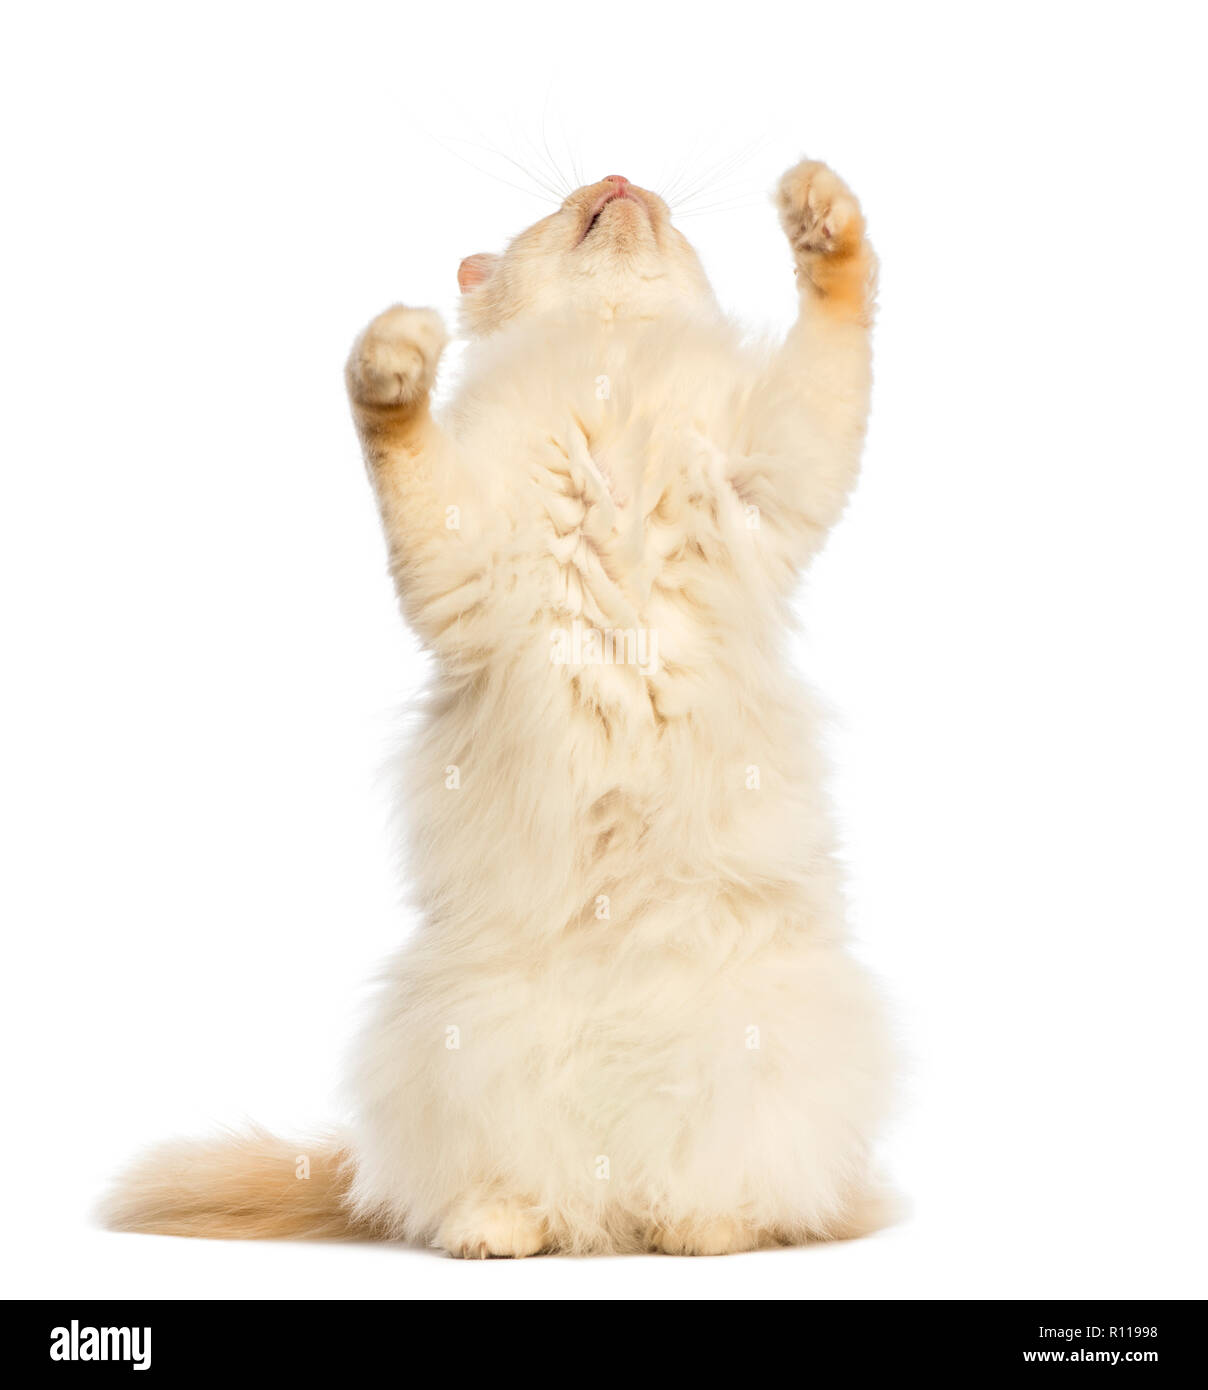 Birman standing on hind legs and reaching against white background Stock Photo